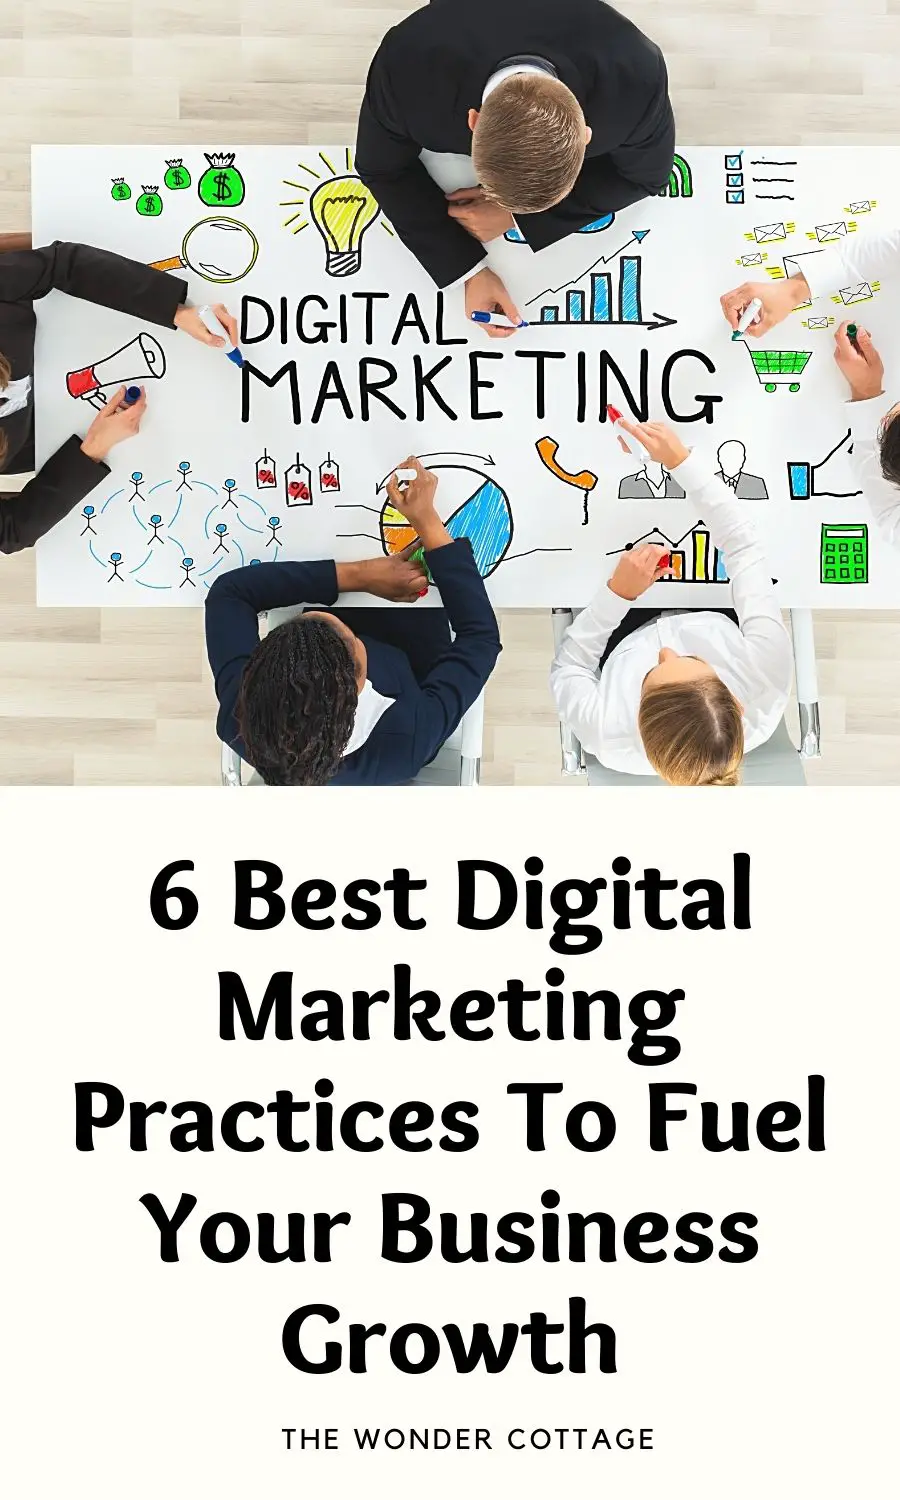 6 Best Digital Marketing Practices To Fuel Your Business Growth